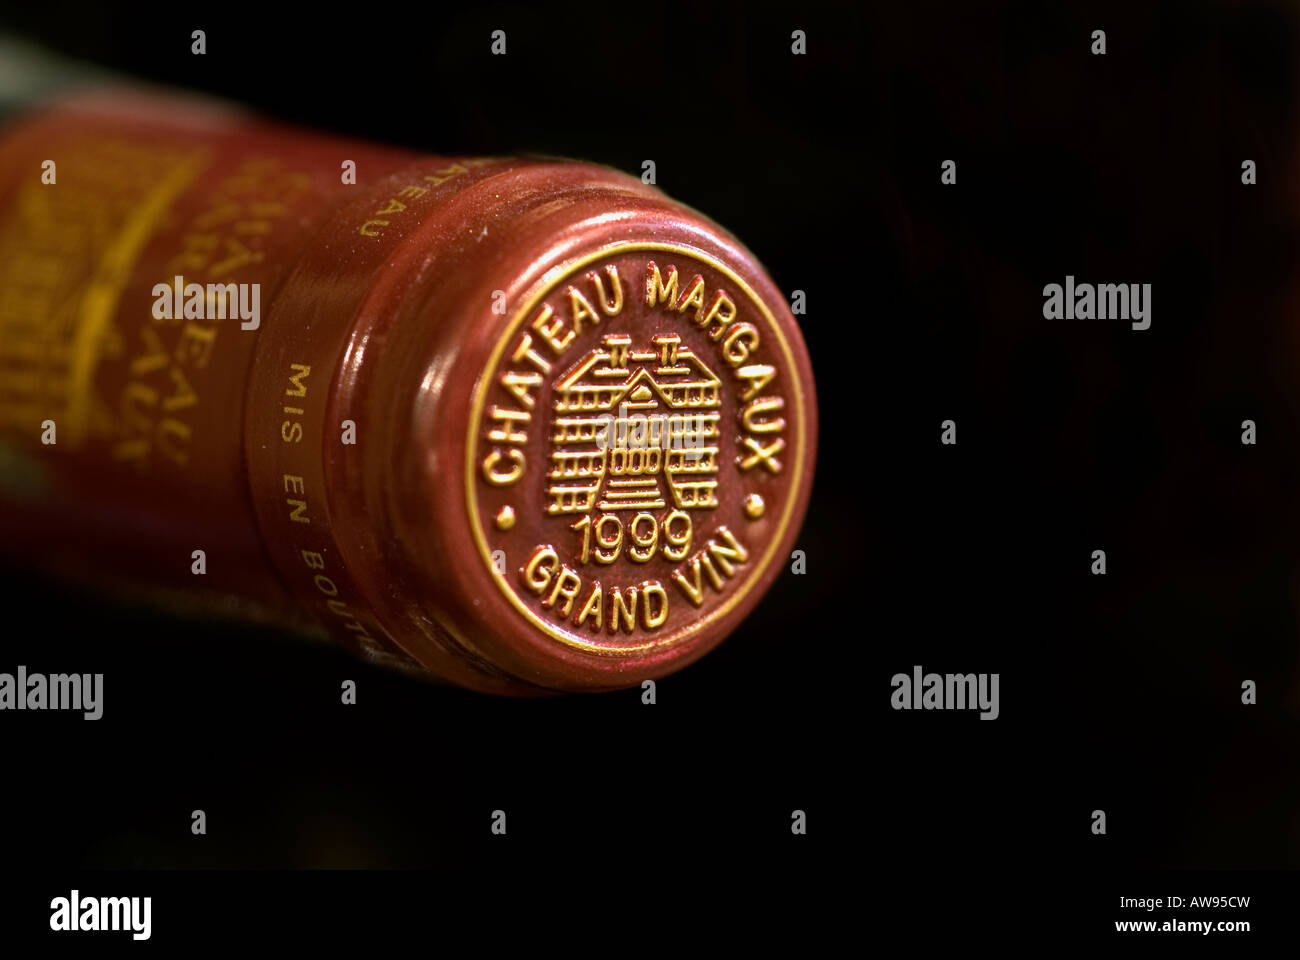 Top of a single Bottle Chateau Margaux Stock Photo